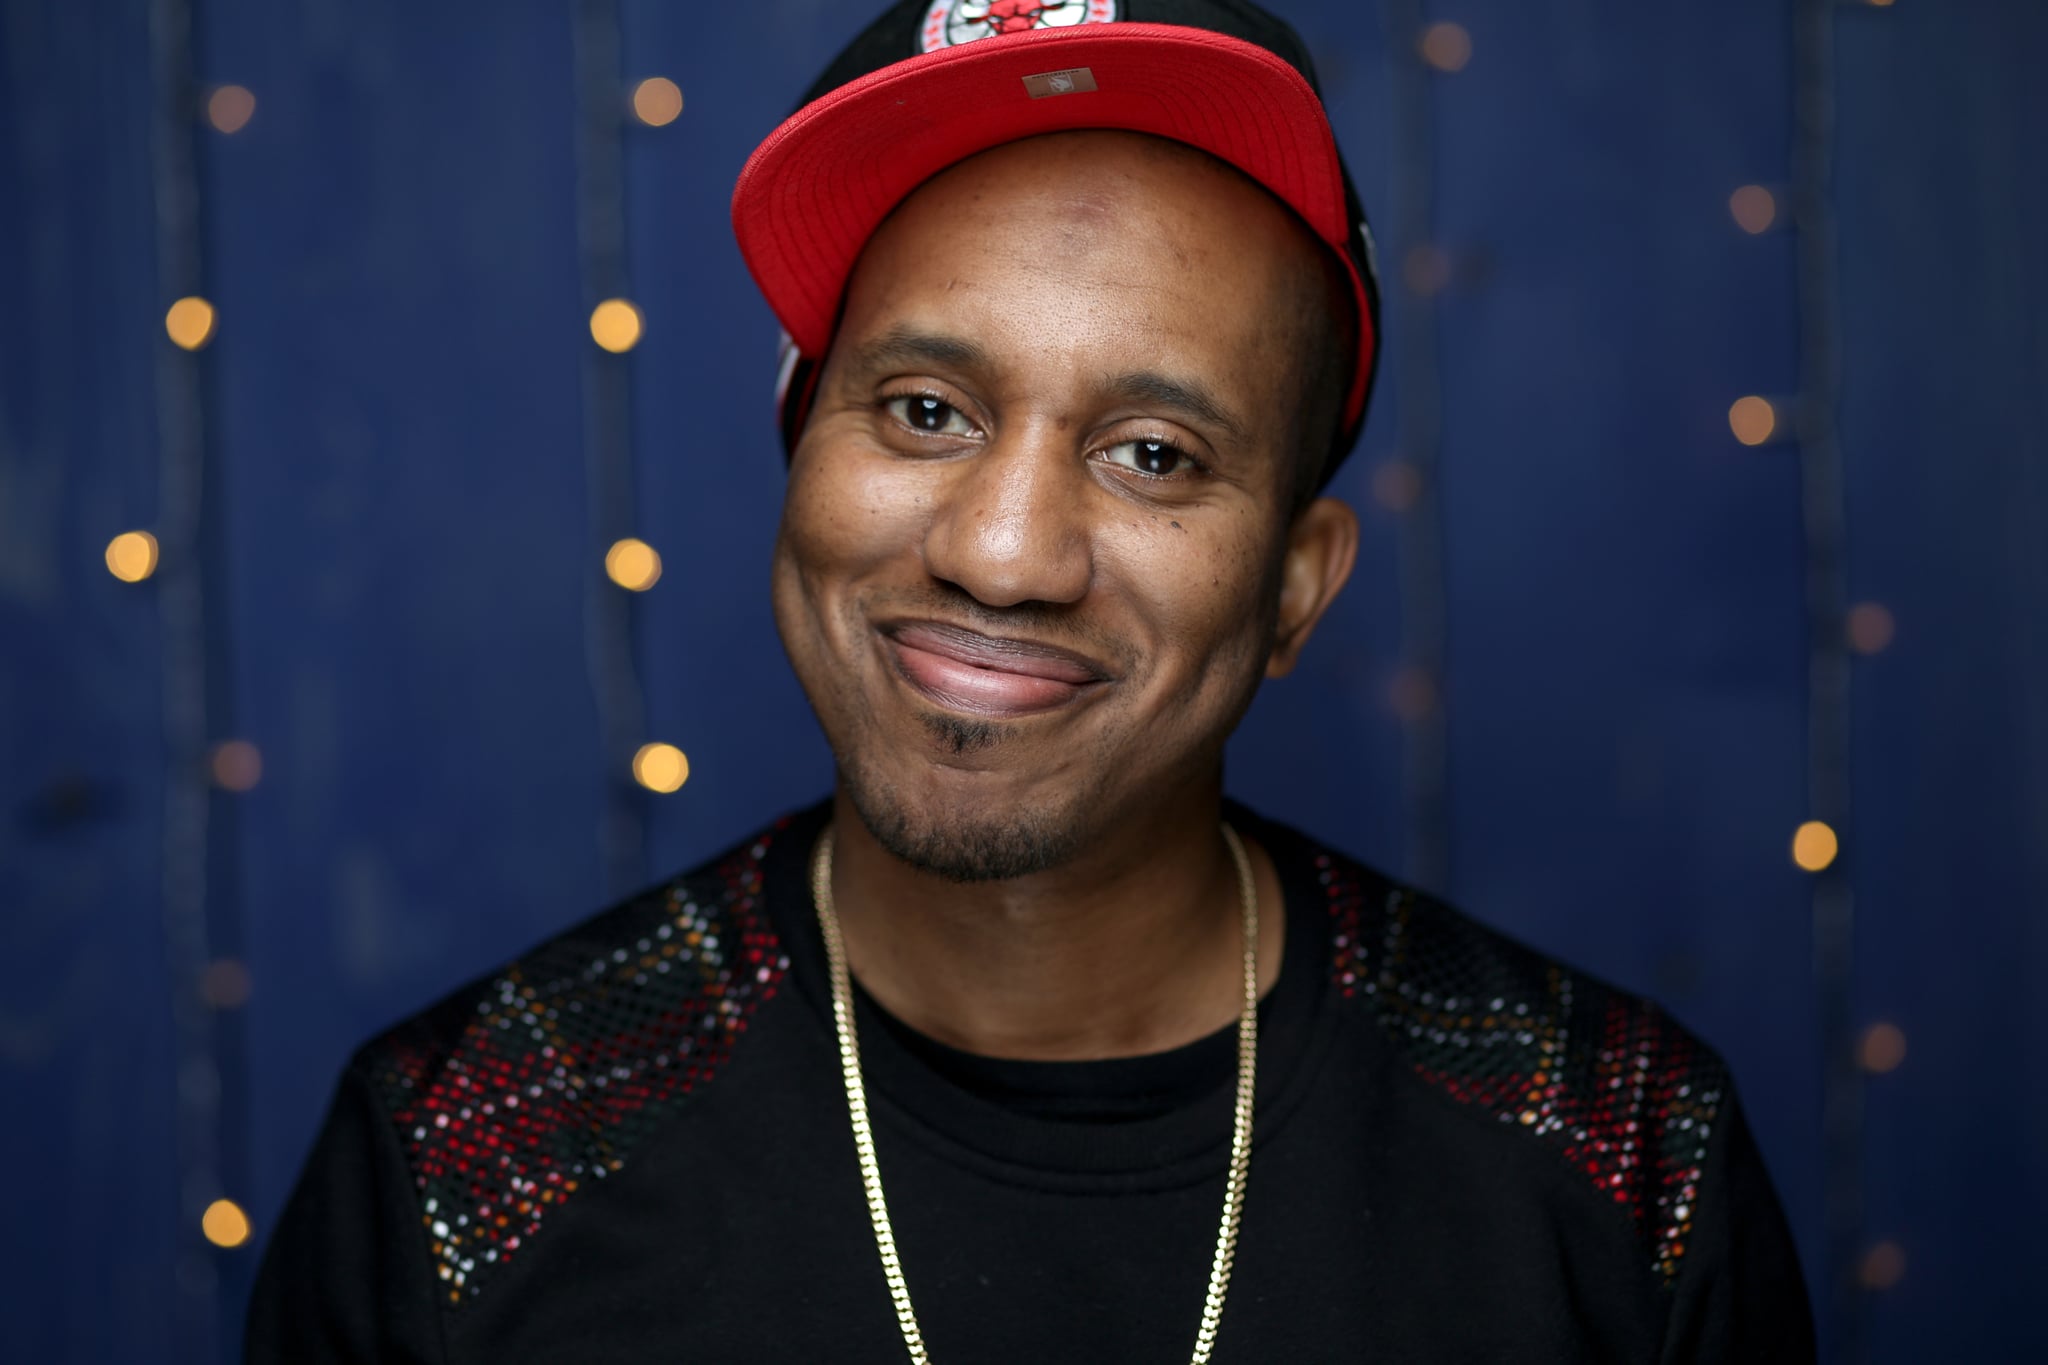 PARK CITY, UTAH - JANUARY 26: Chris Redd of 'Scare Me' attends the IMDb Studio at Acura Festival Village on location at the 2020 Sundance Film Festival – Day 3 on January 26, 2020 in Park City, Utah. (Photo by Rich Polk/Getty Images for IMDb)